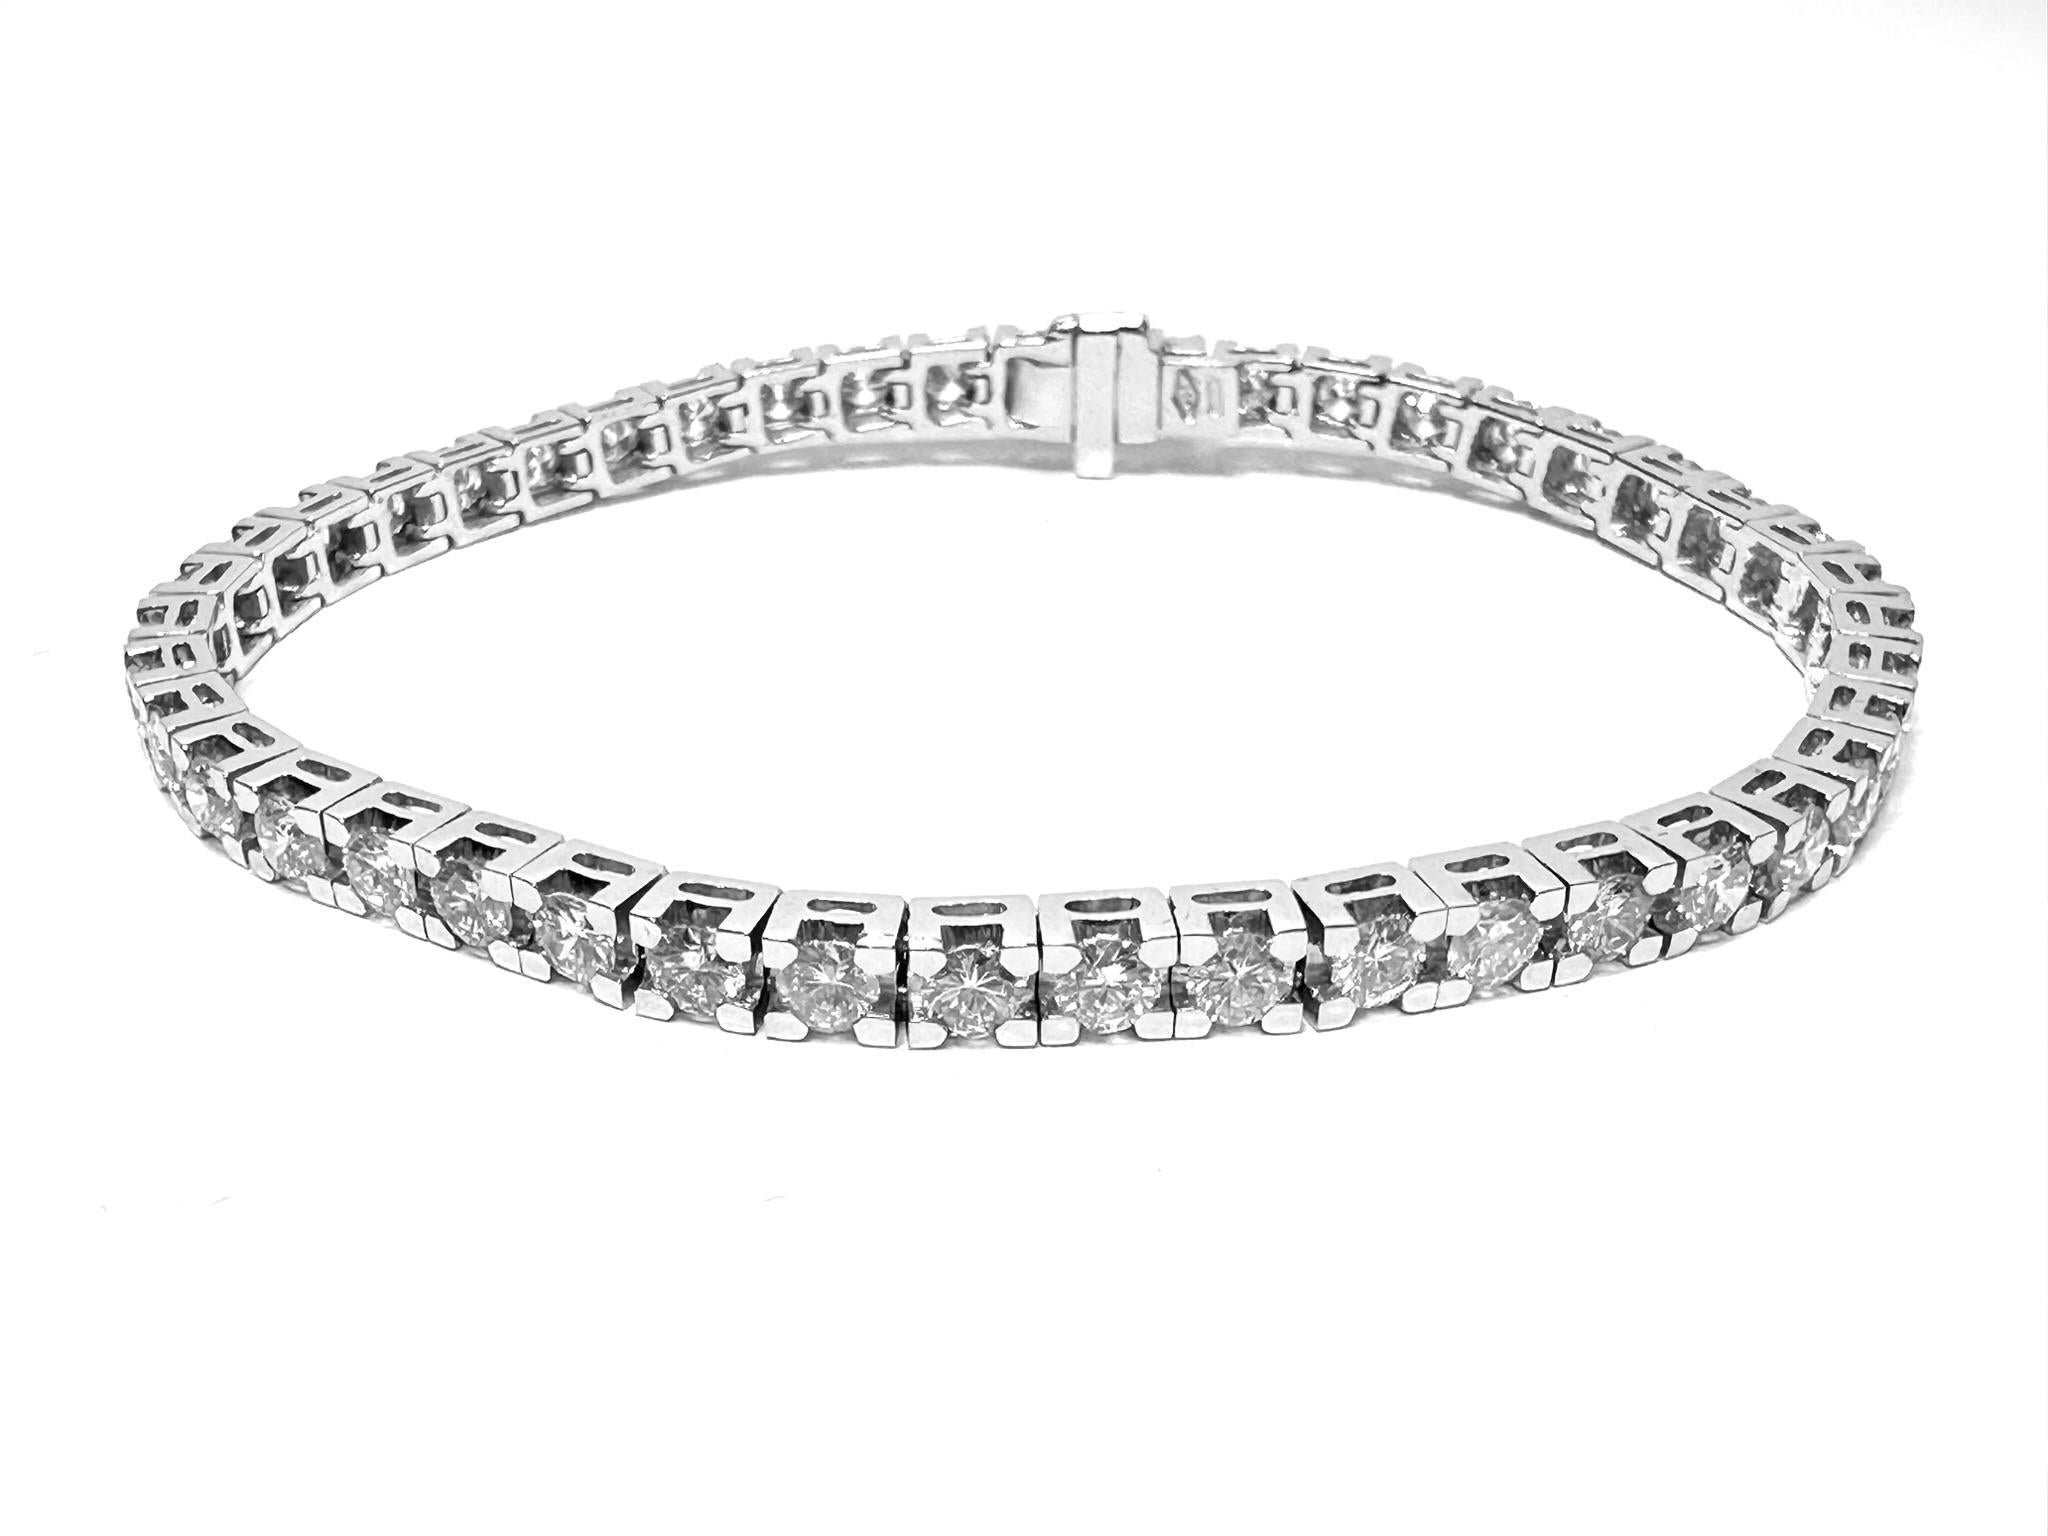 Contemporary HRD Certified Tennis Bracelet White Gold 5.60ct Diamonds For Sale